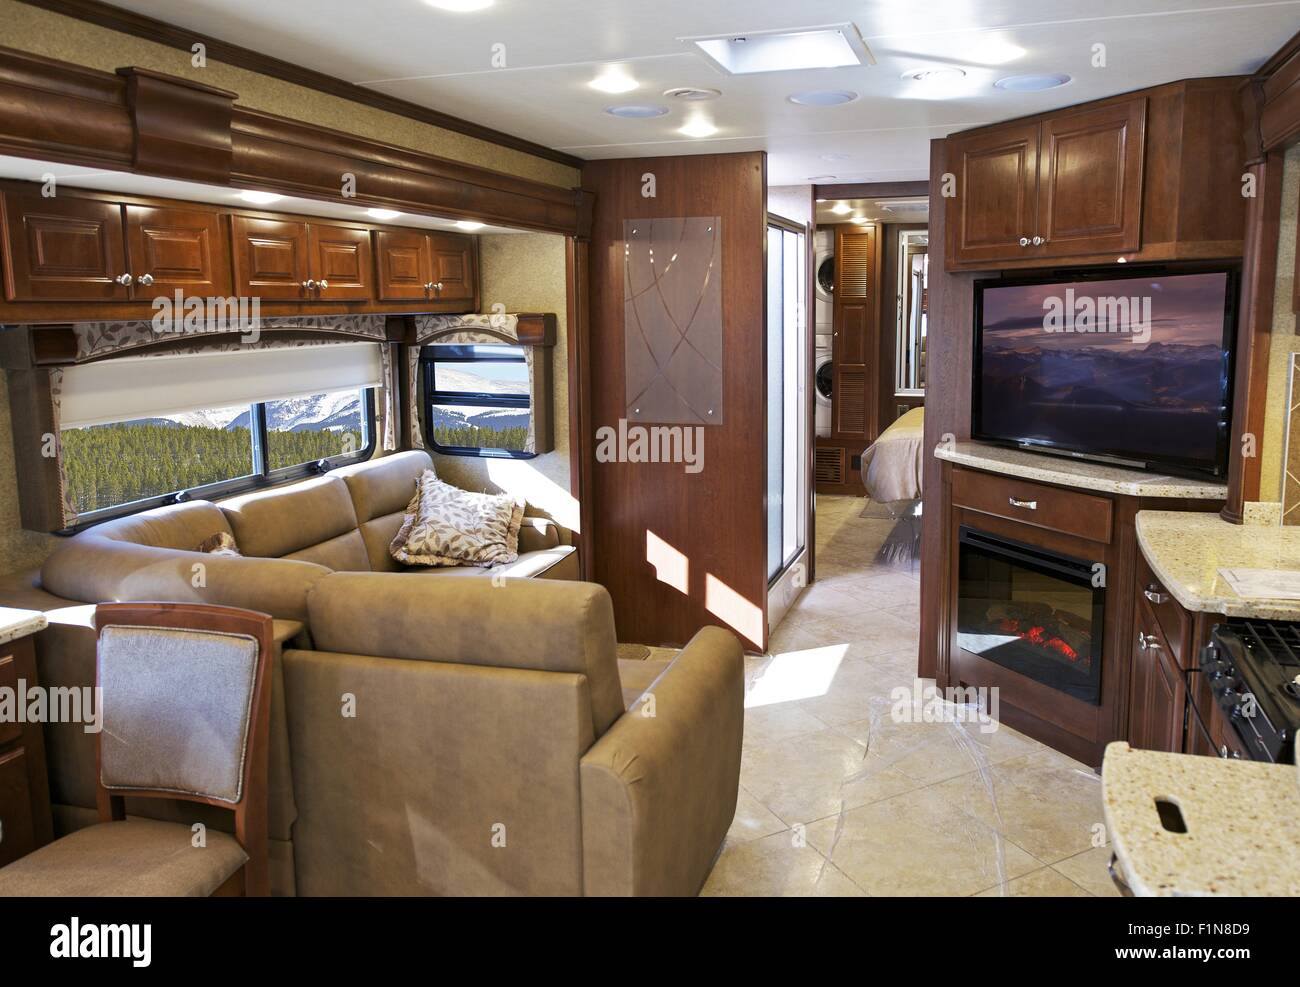 Rv Interior High Resolution Stock Photography and Images - Alamy